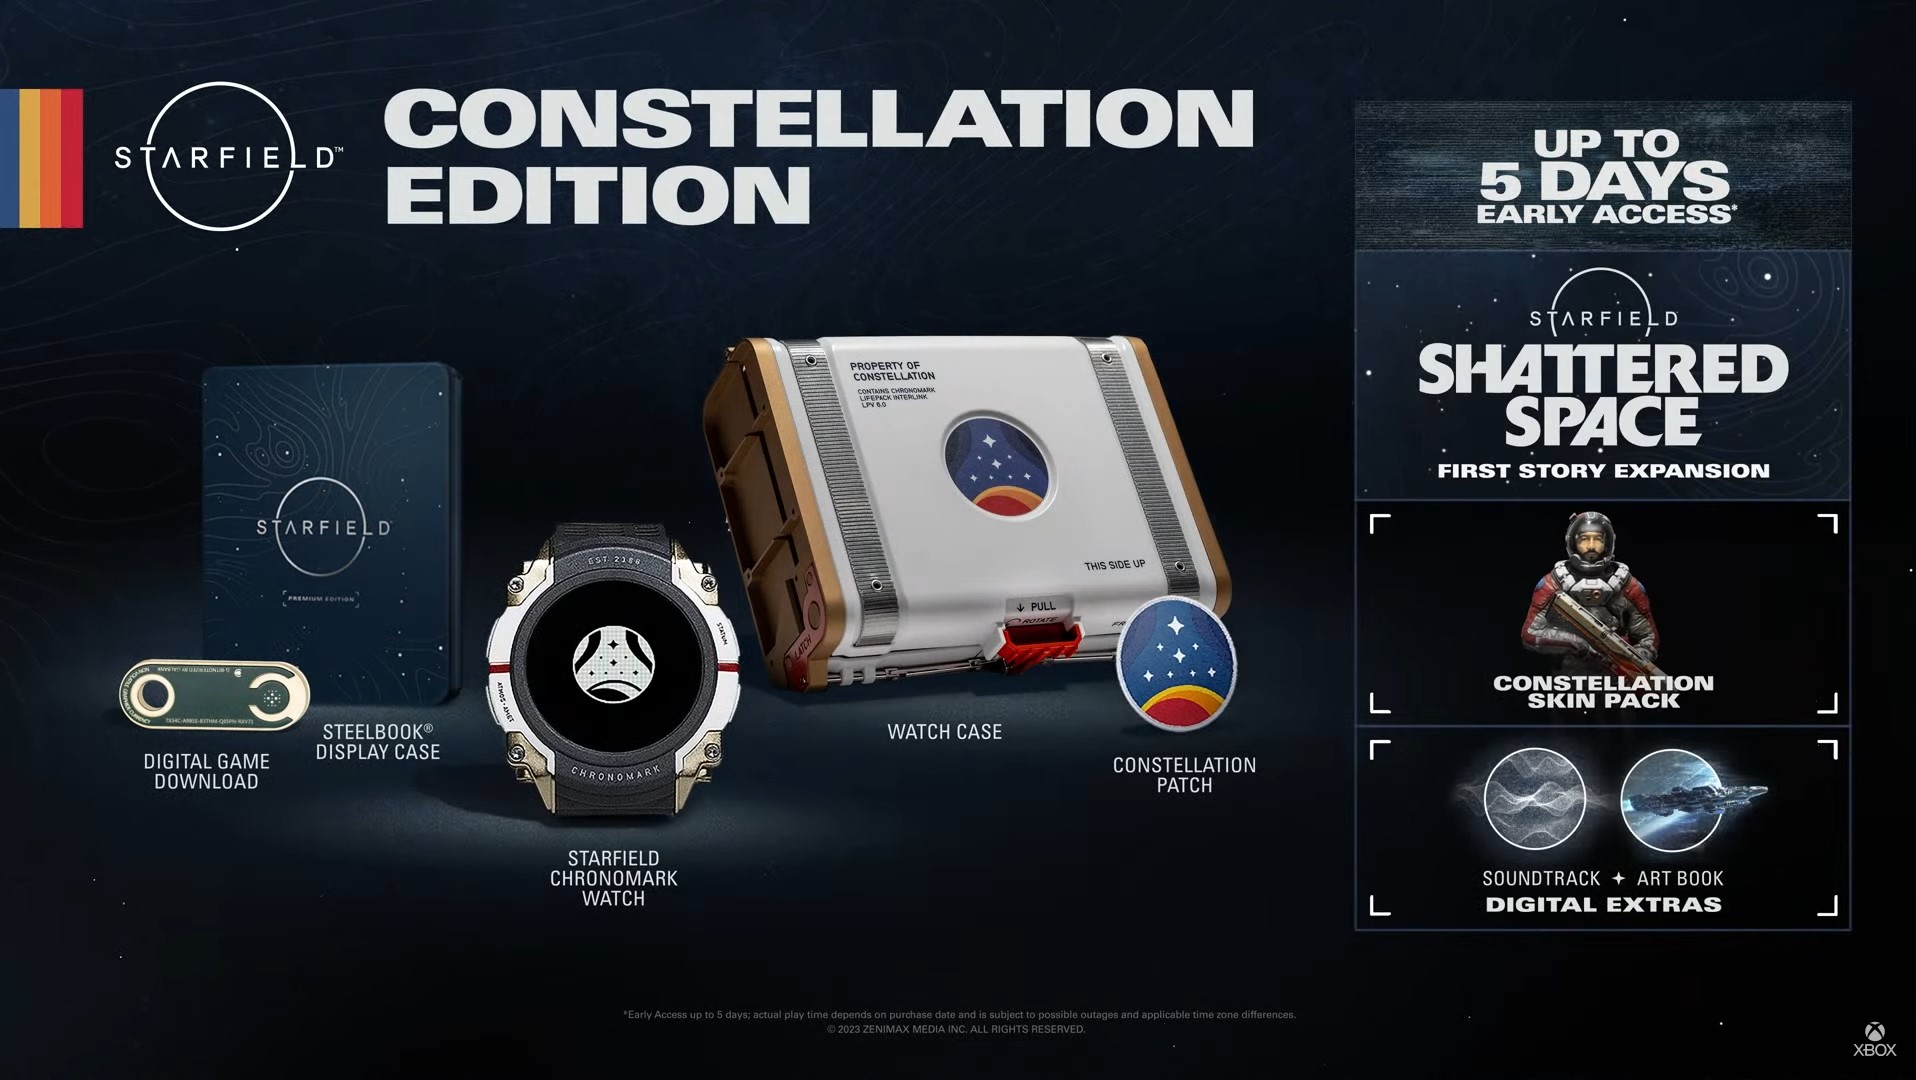 Starfield Constellation Edition Comes With No Physical Disc